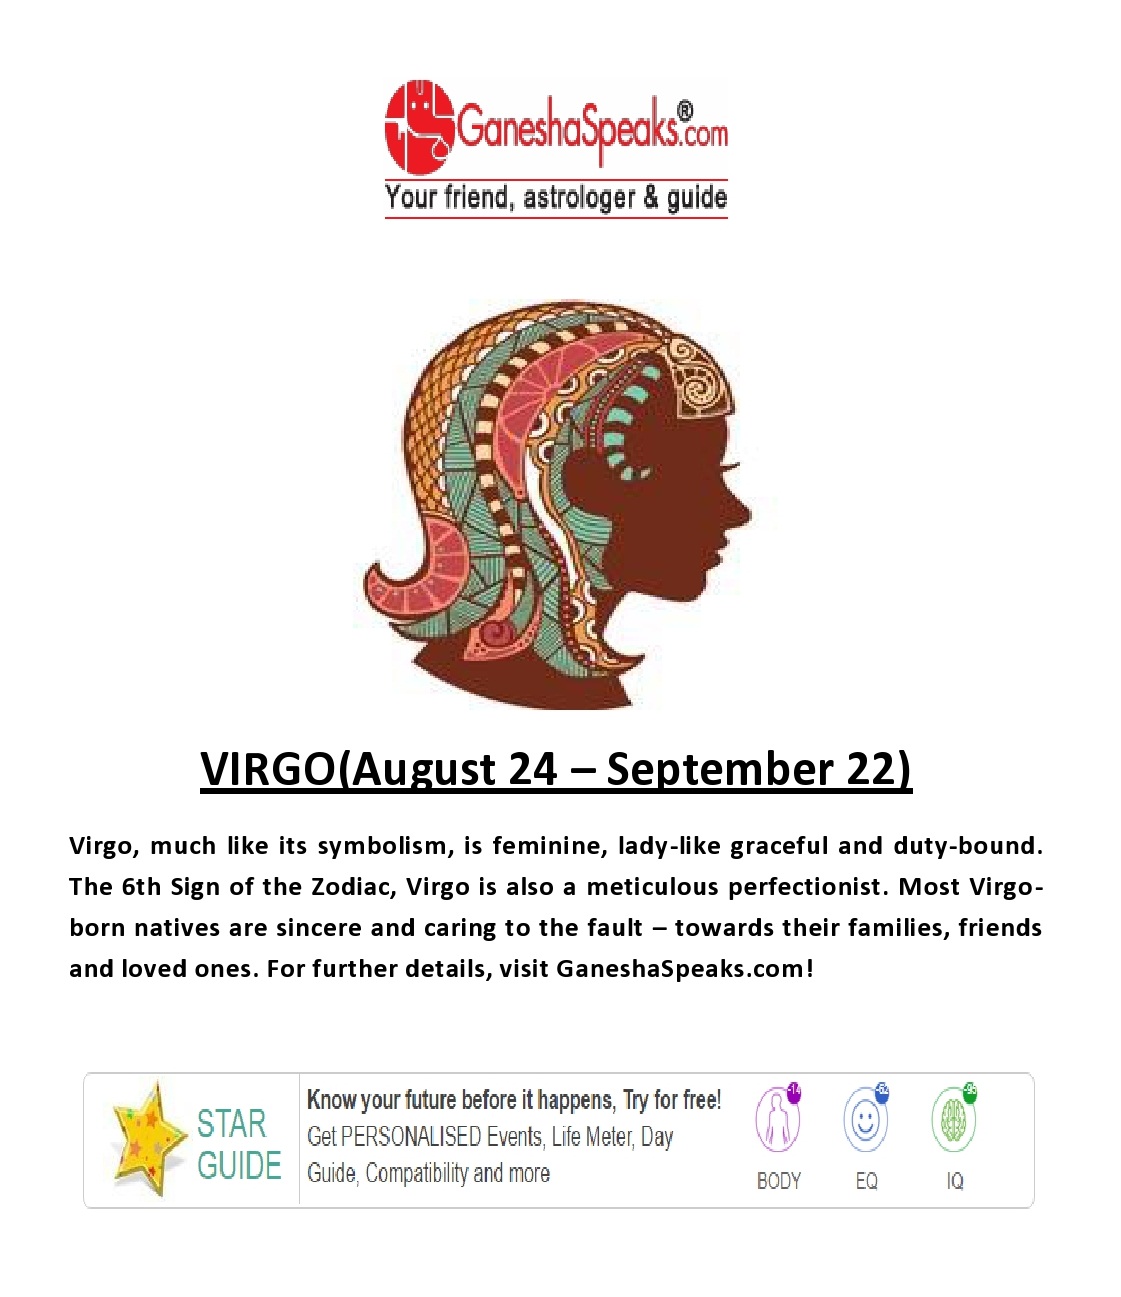 Virgo Sun sign Astrology from Visual.ly